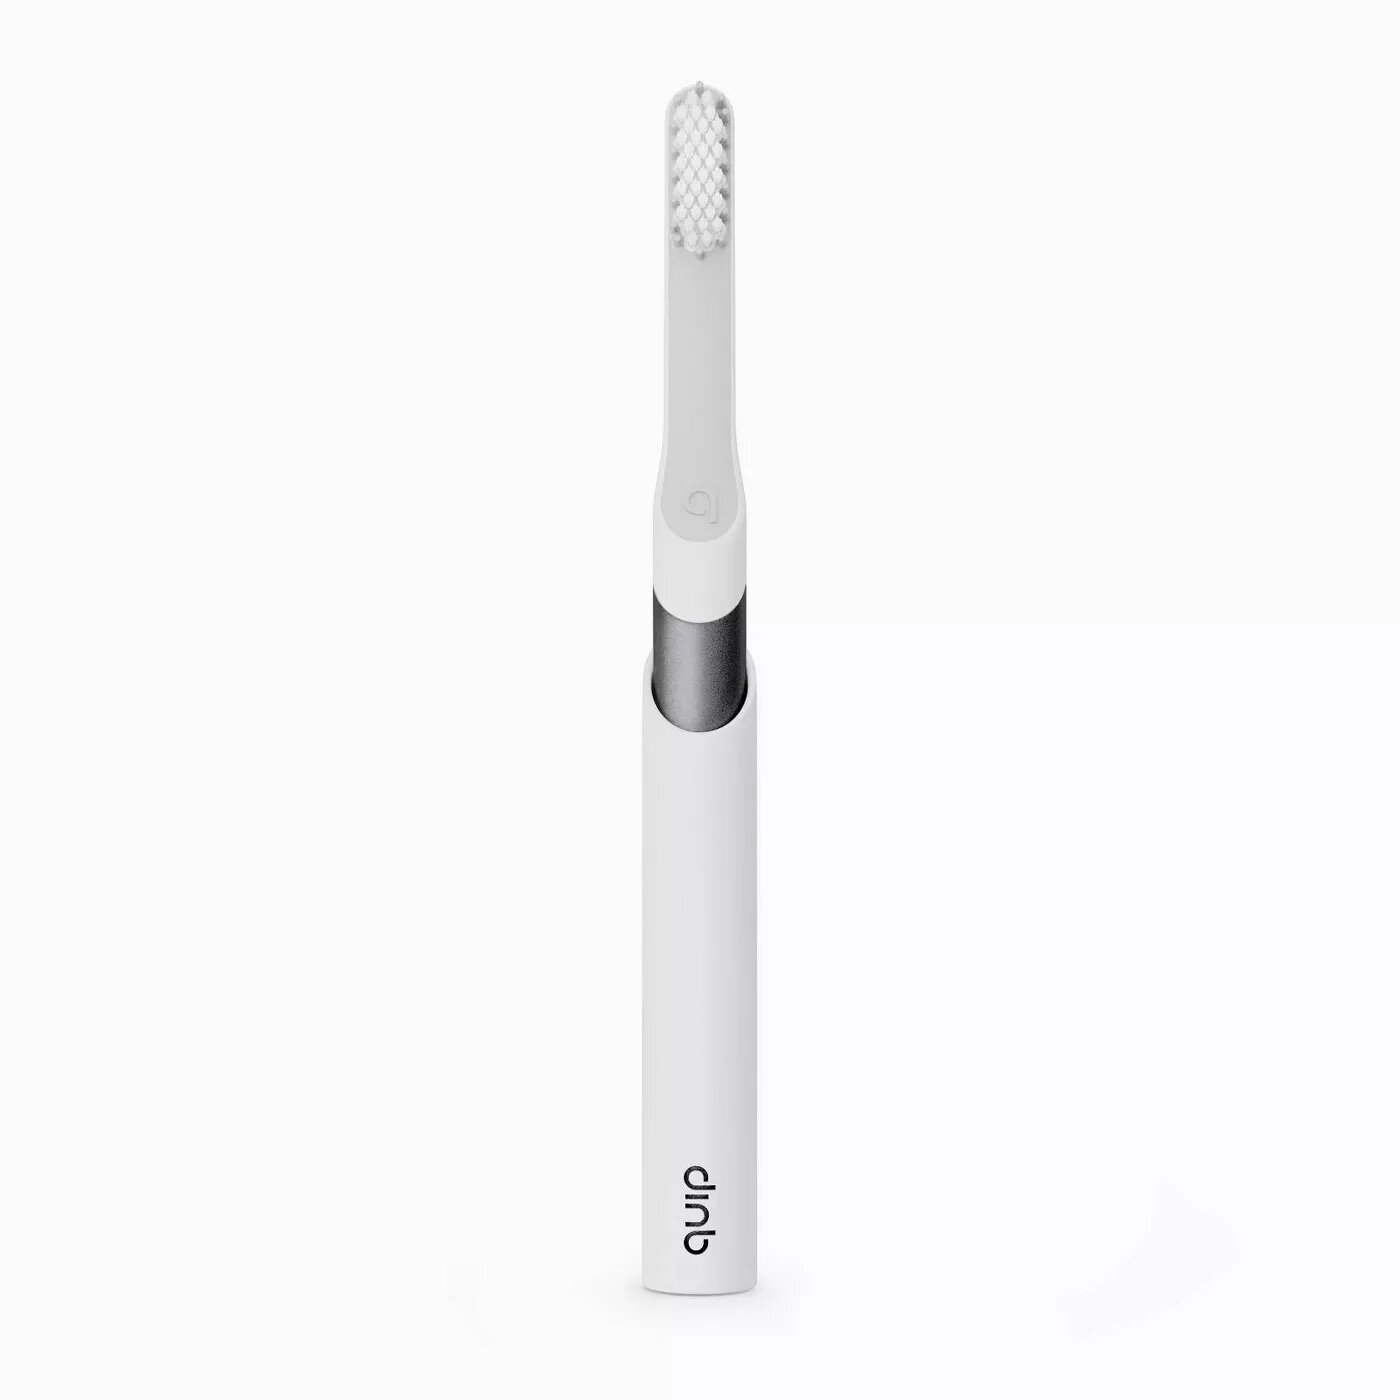 quip Electric Toothbrush, Built-In Timer + Travel Case, Slate Metal - image 3 of 6